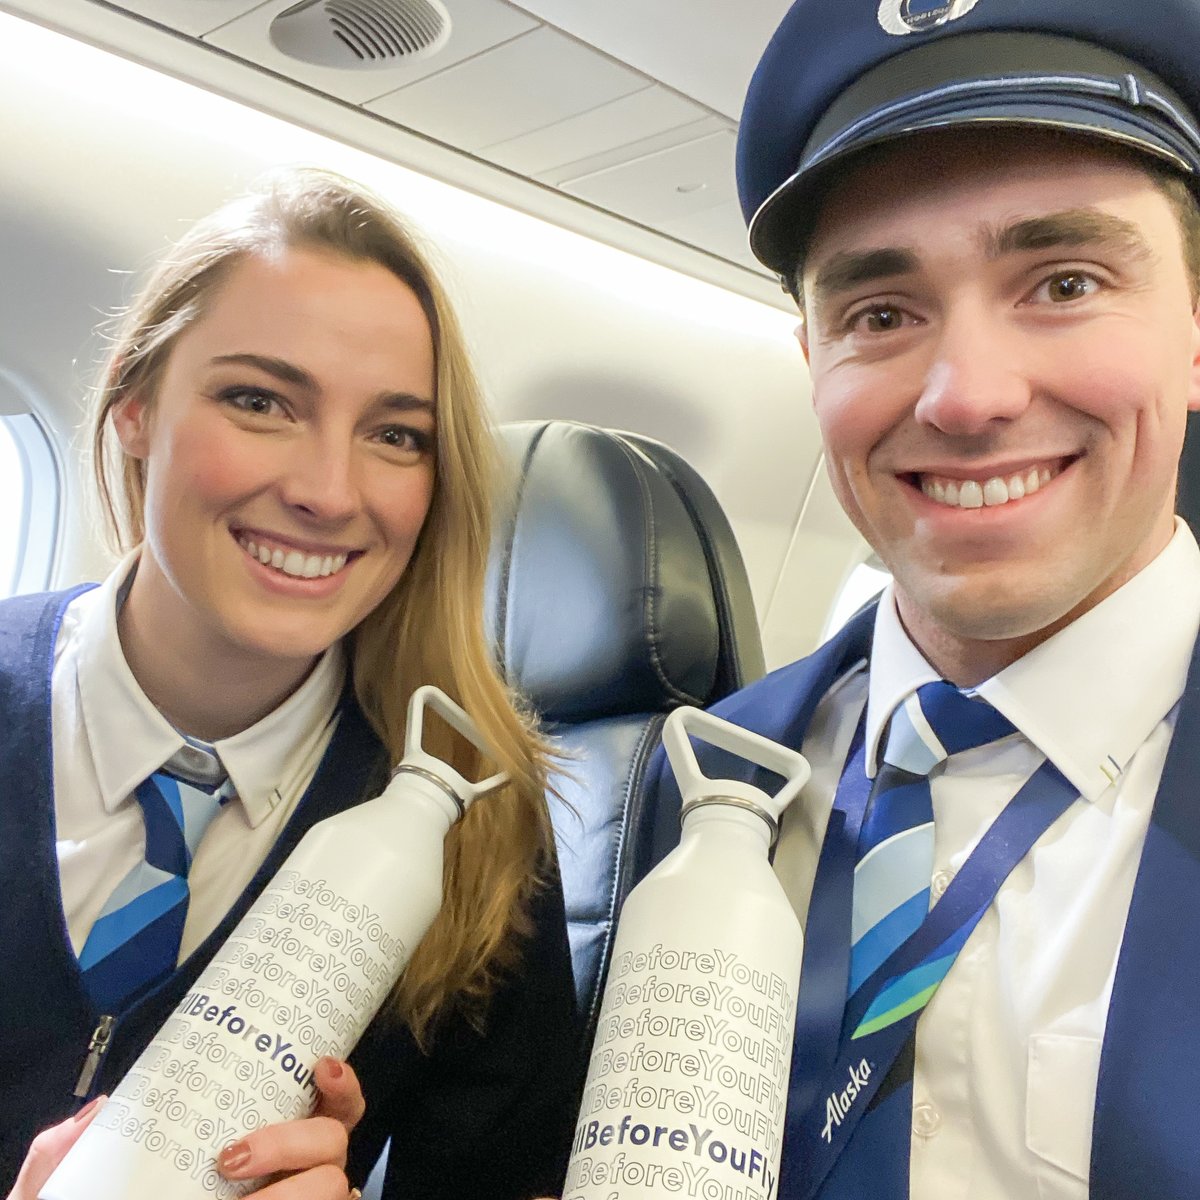 They remembered to #FillBeforeYouFly! How about you? 💧When you do, you help us support the environment and reduce single-use plastics.